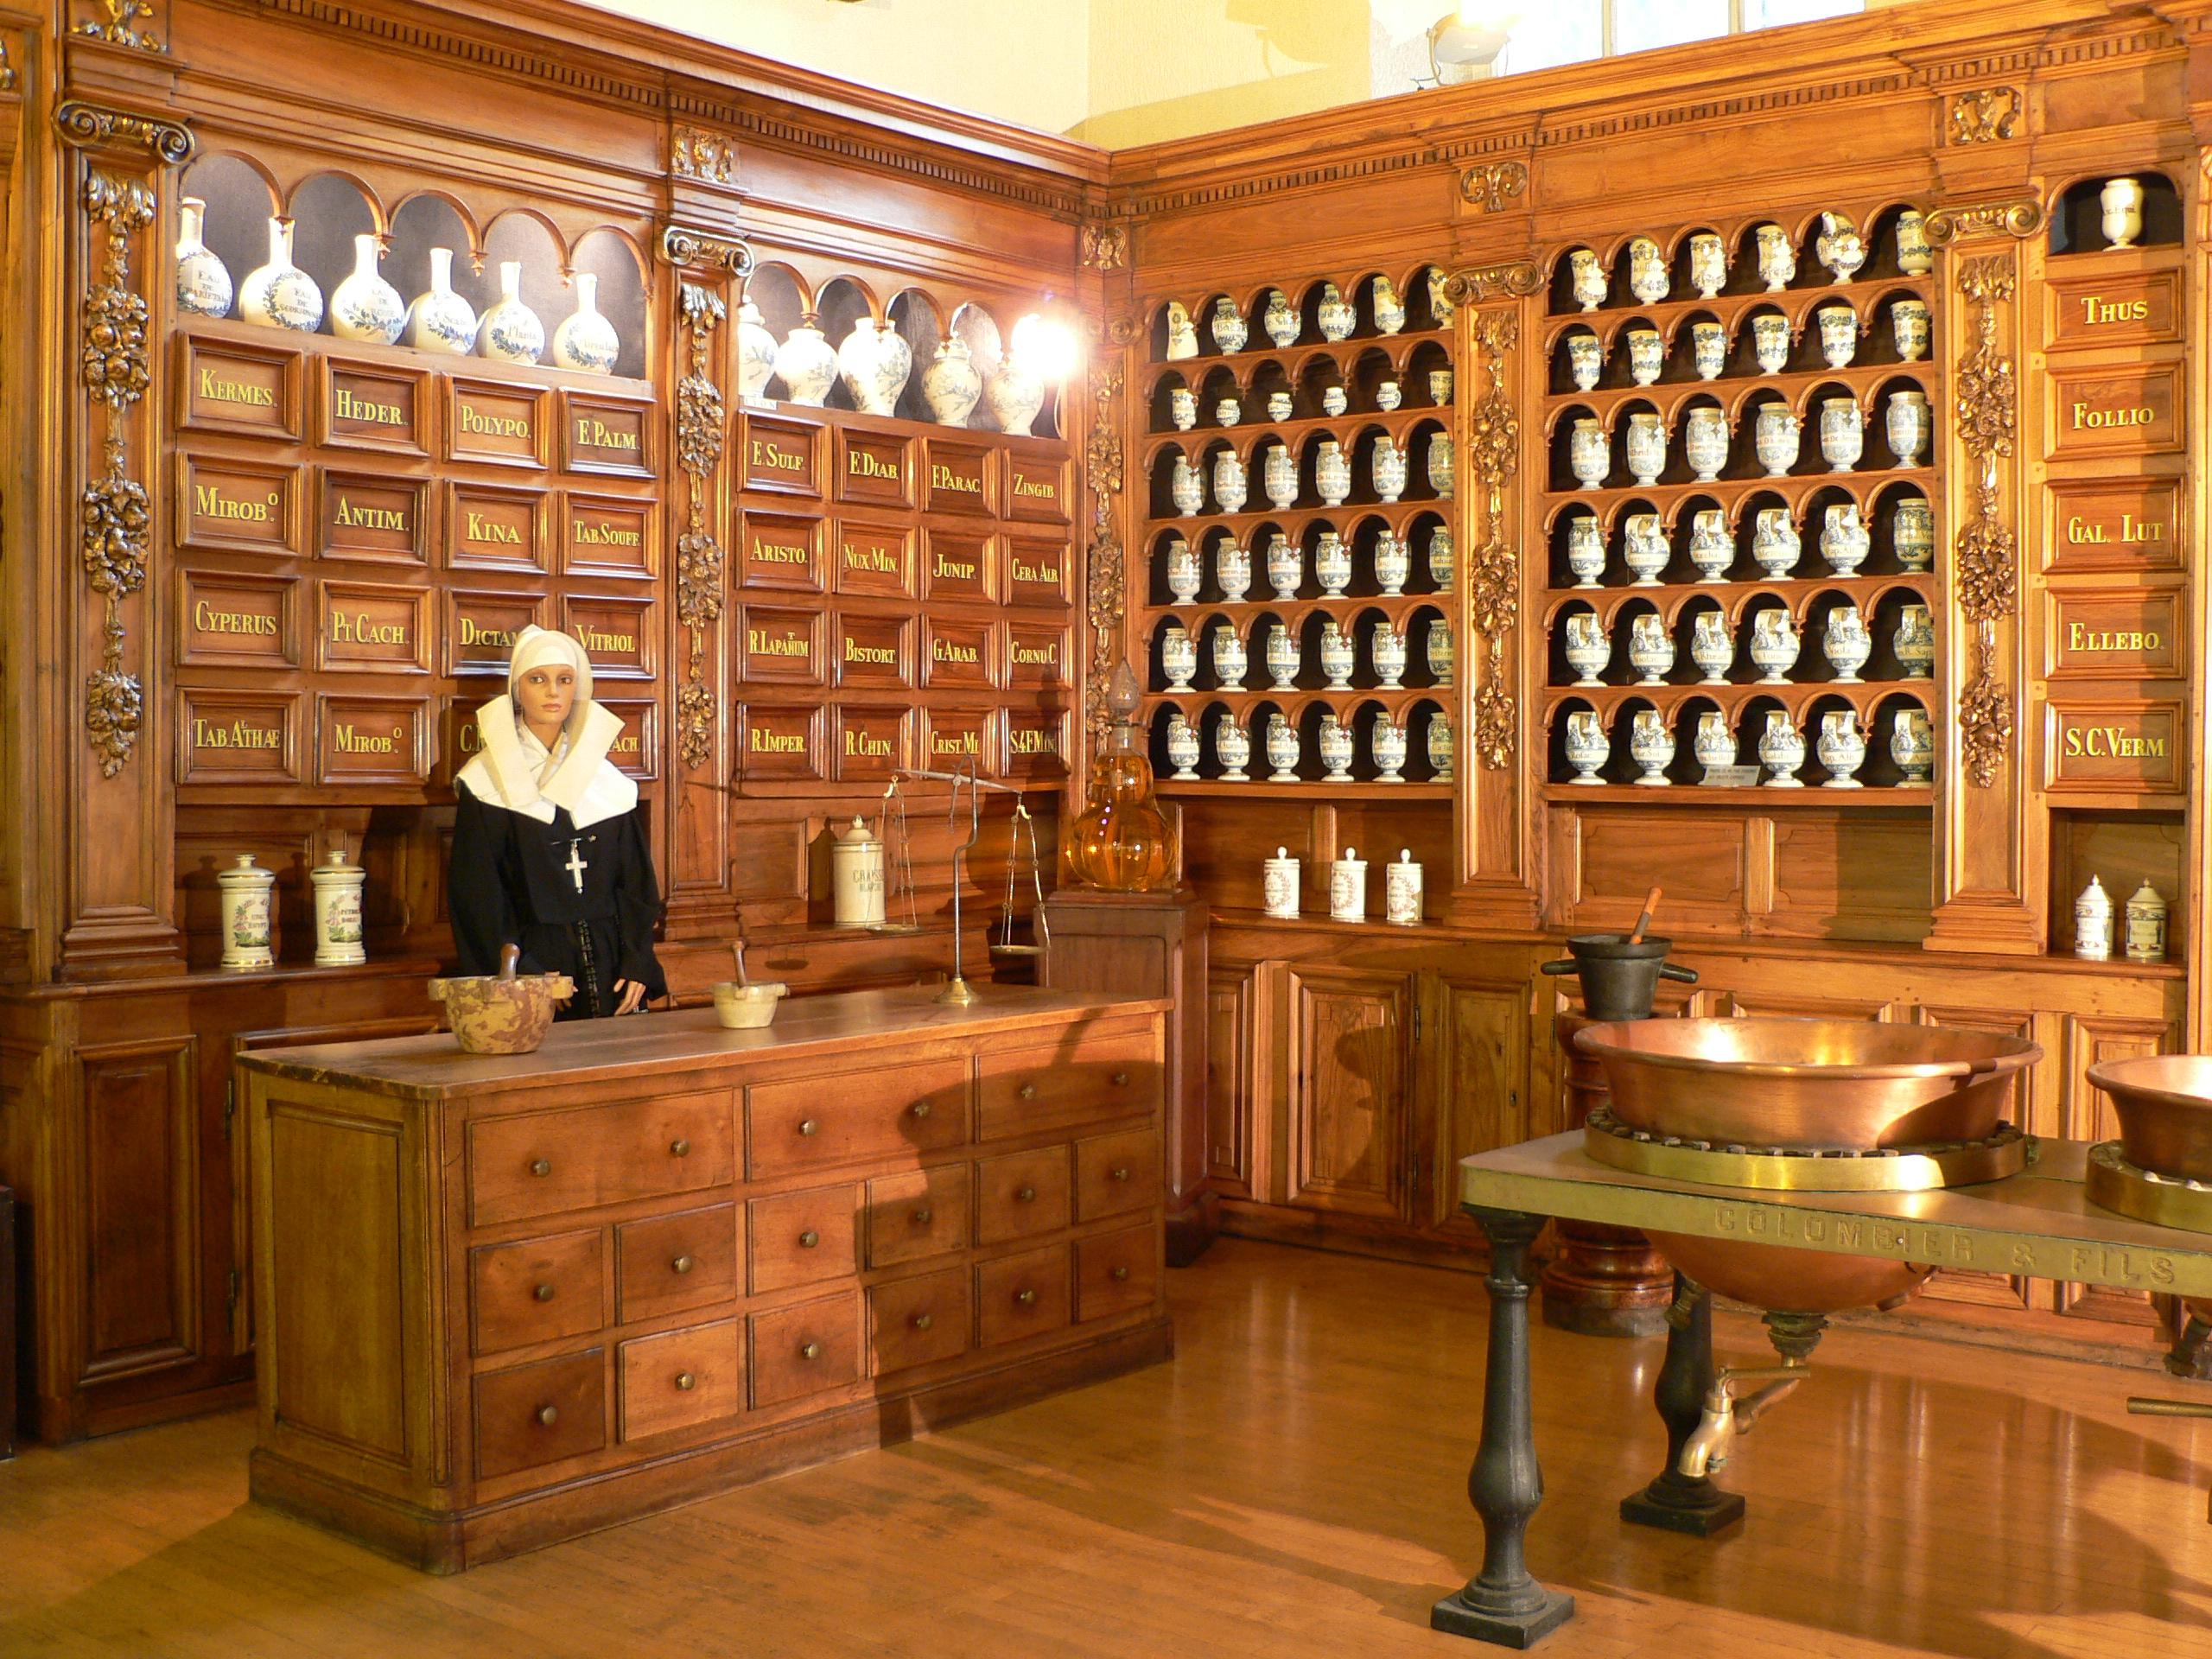 Museum of the history of medicine